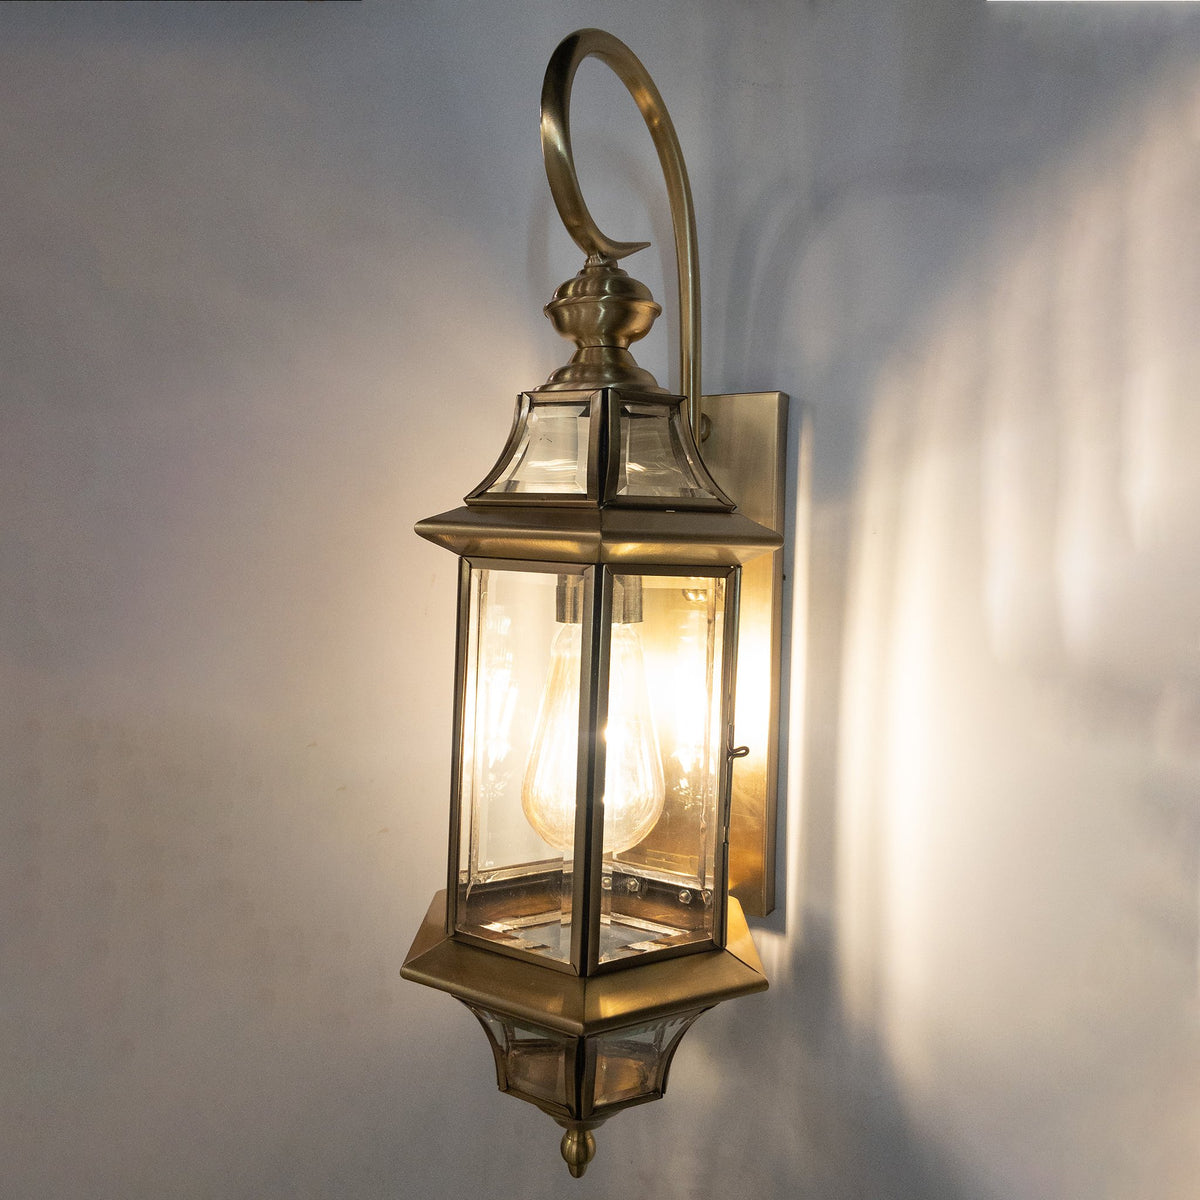 Standing Tall Wall Lamp India